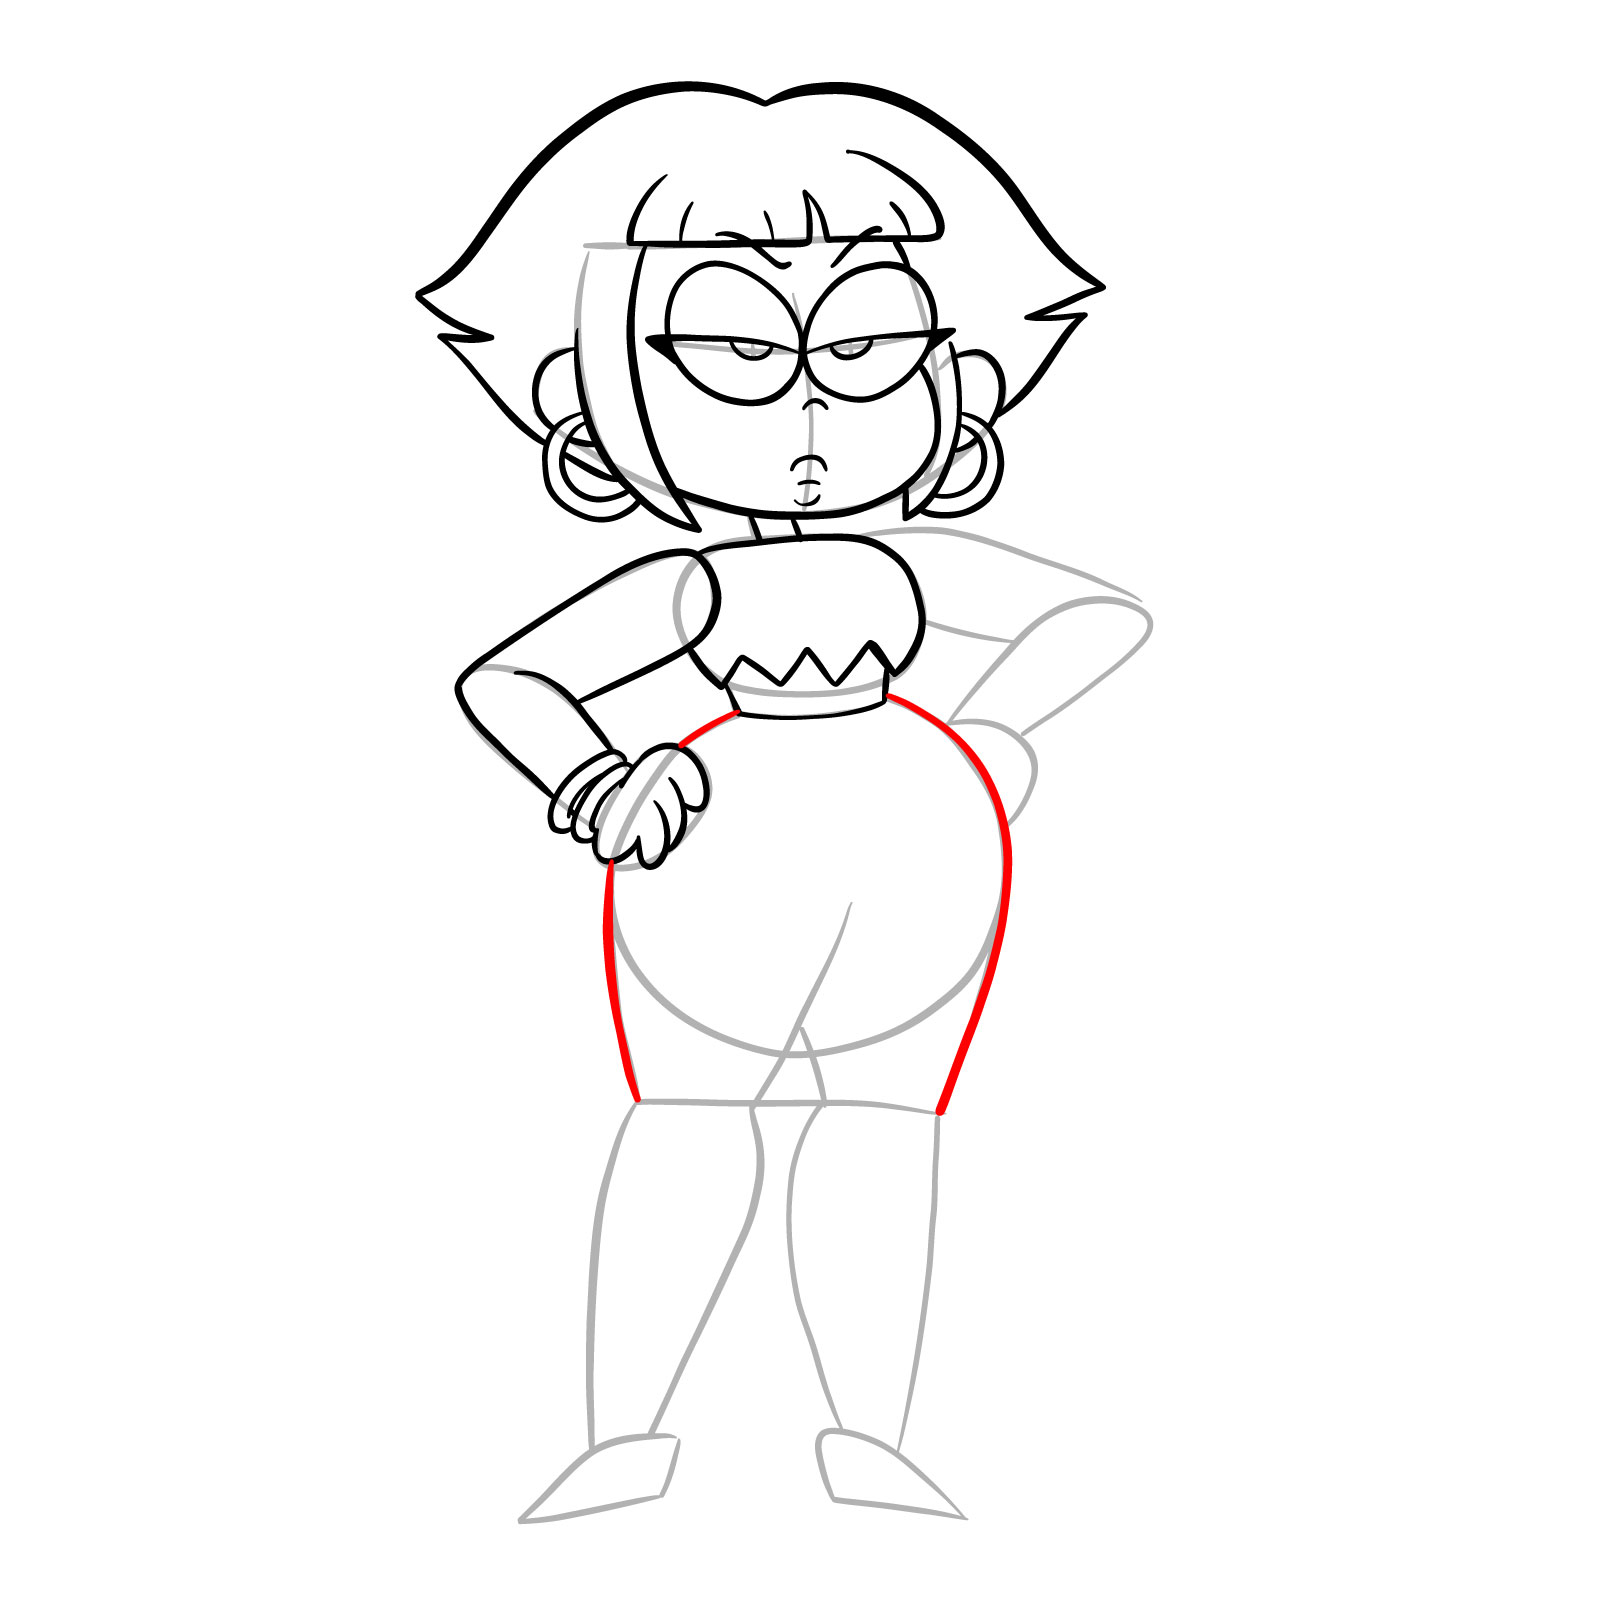 How to draw Human Shannon from OK K.O.! - step 21